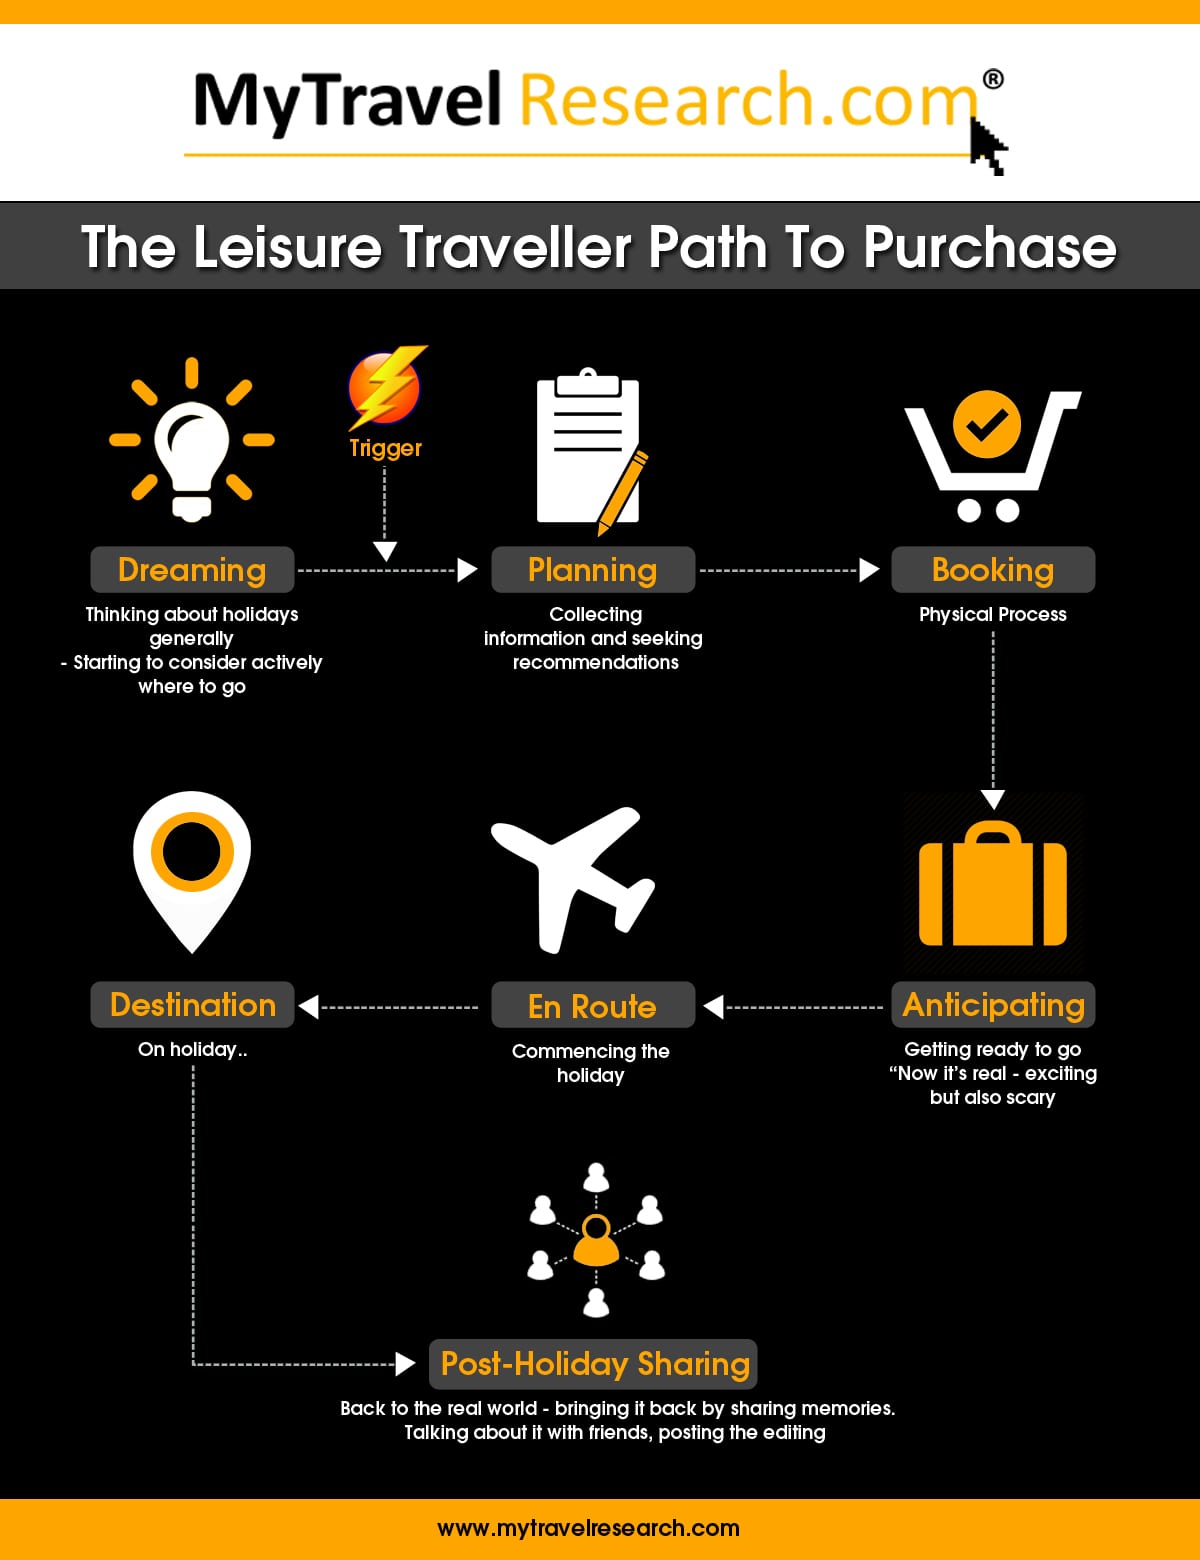 Travel path to purchase image